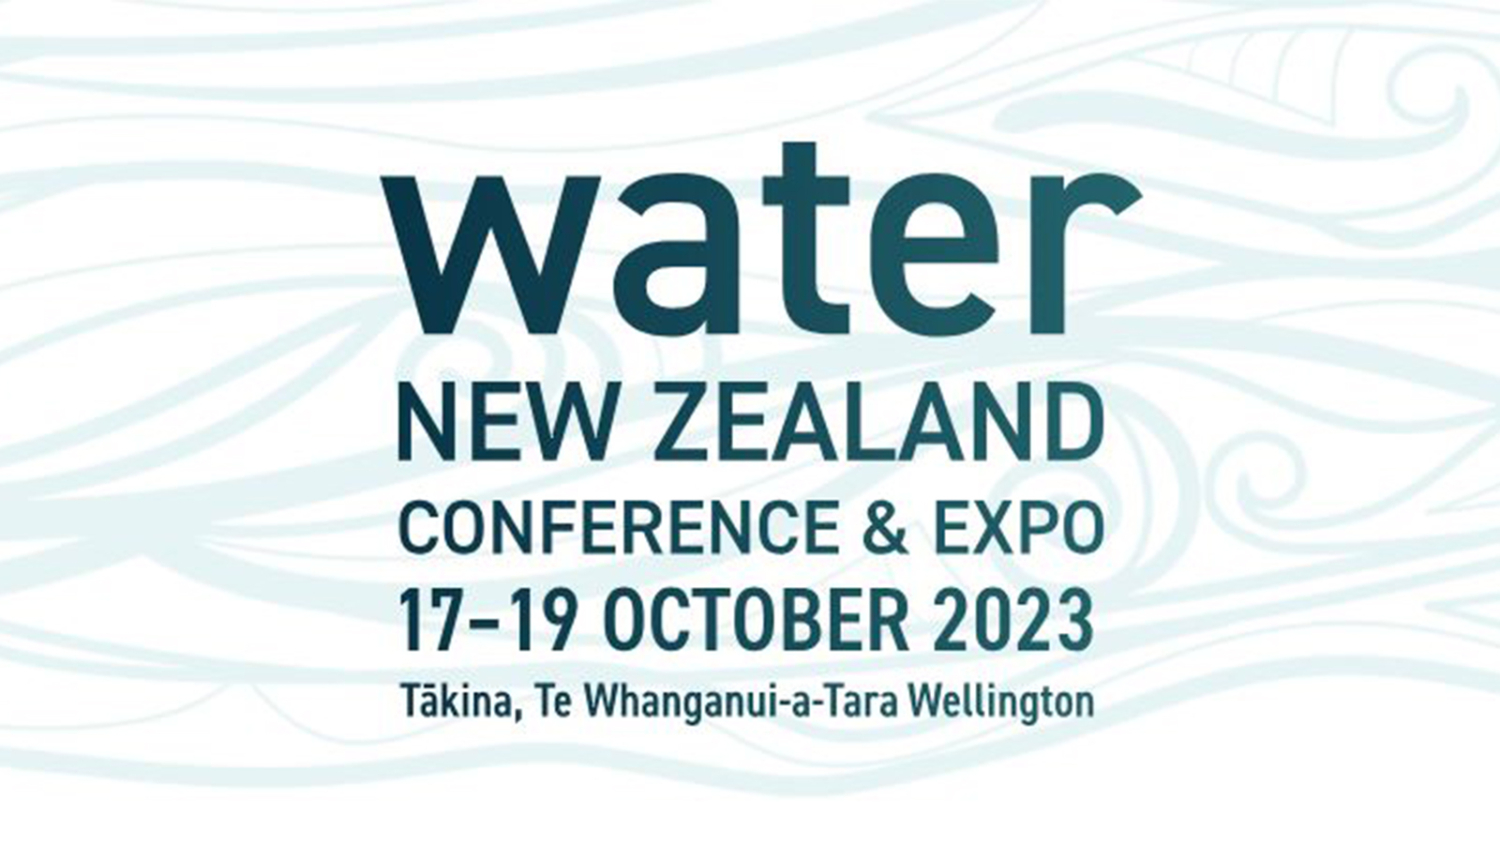 Hydroflux to Exhibit at Water New Zealand Conference & Expo Hydroflux